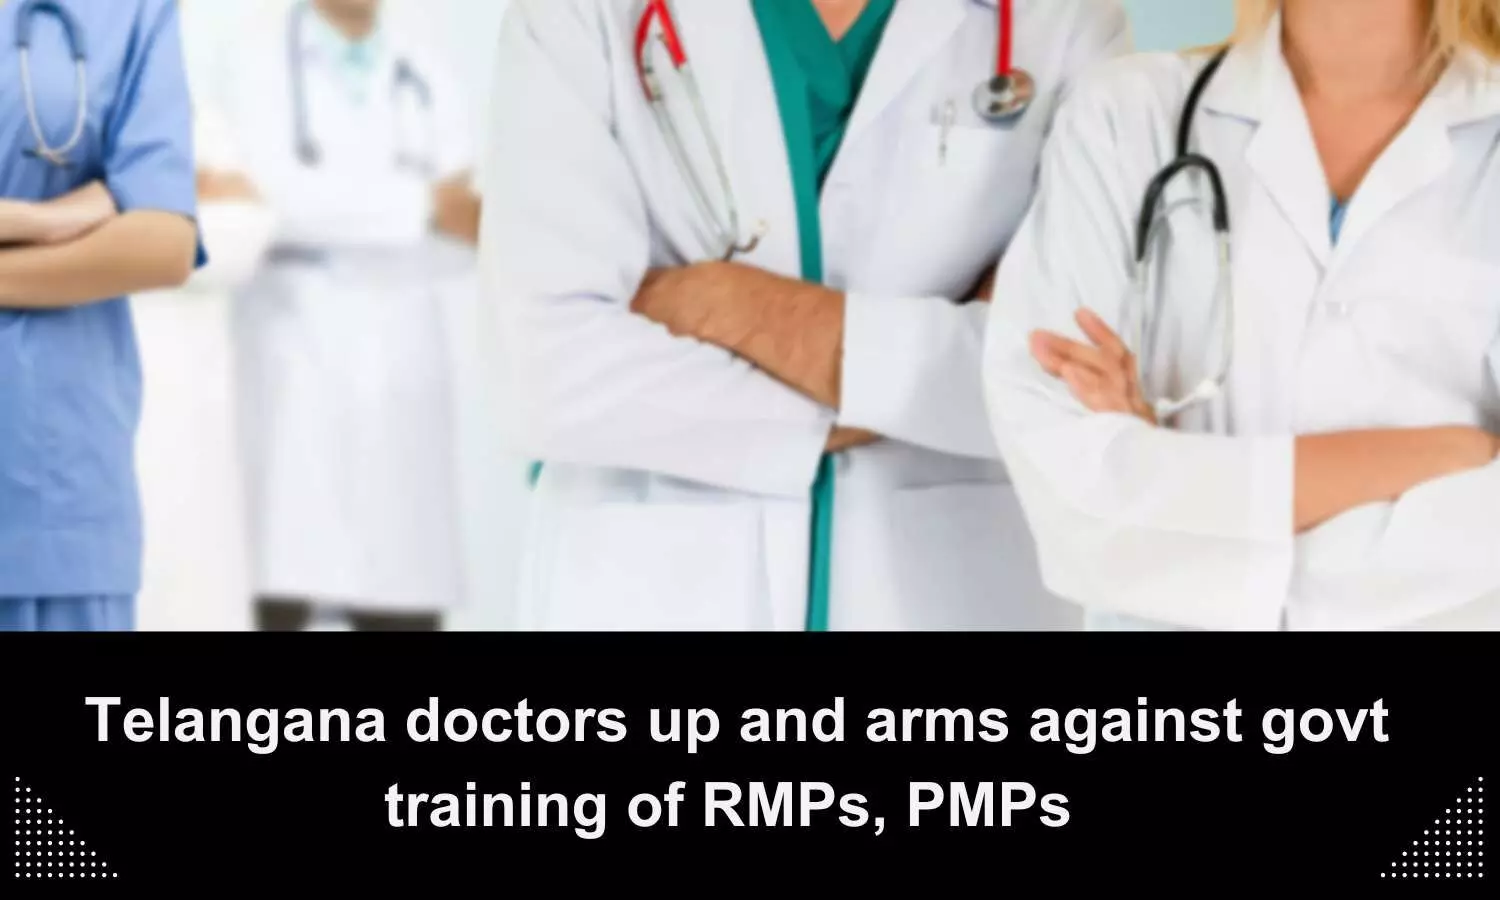 Telangana doctors up and arms against govt training of PMPs, RMPs